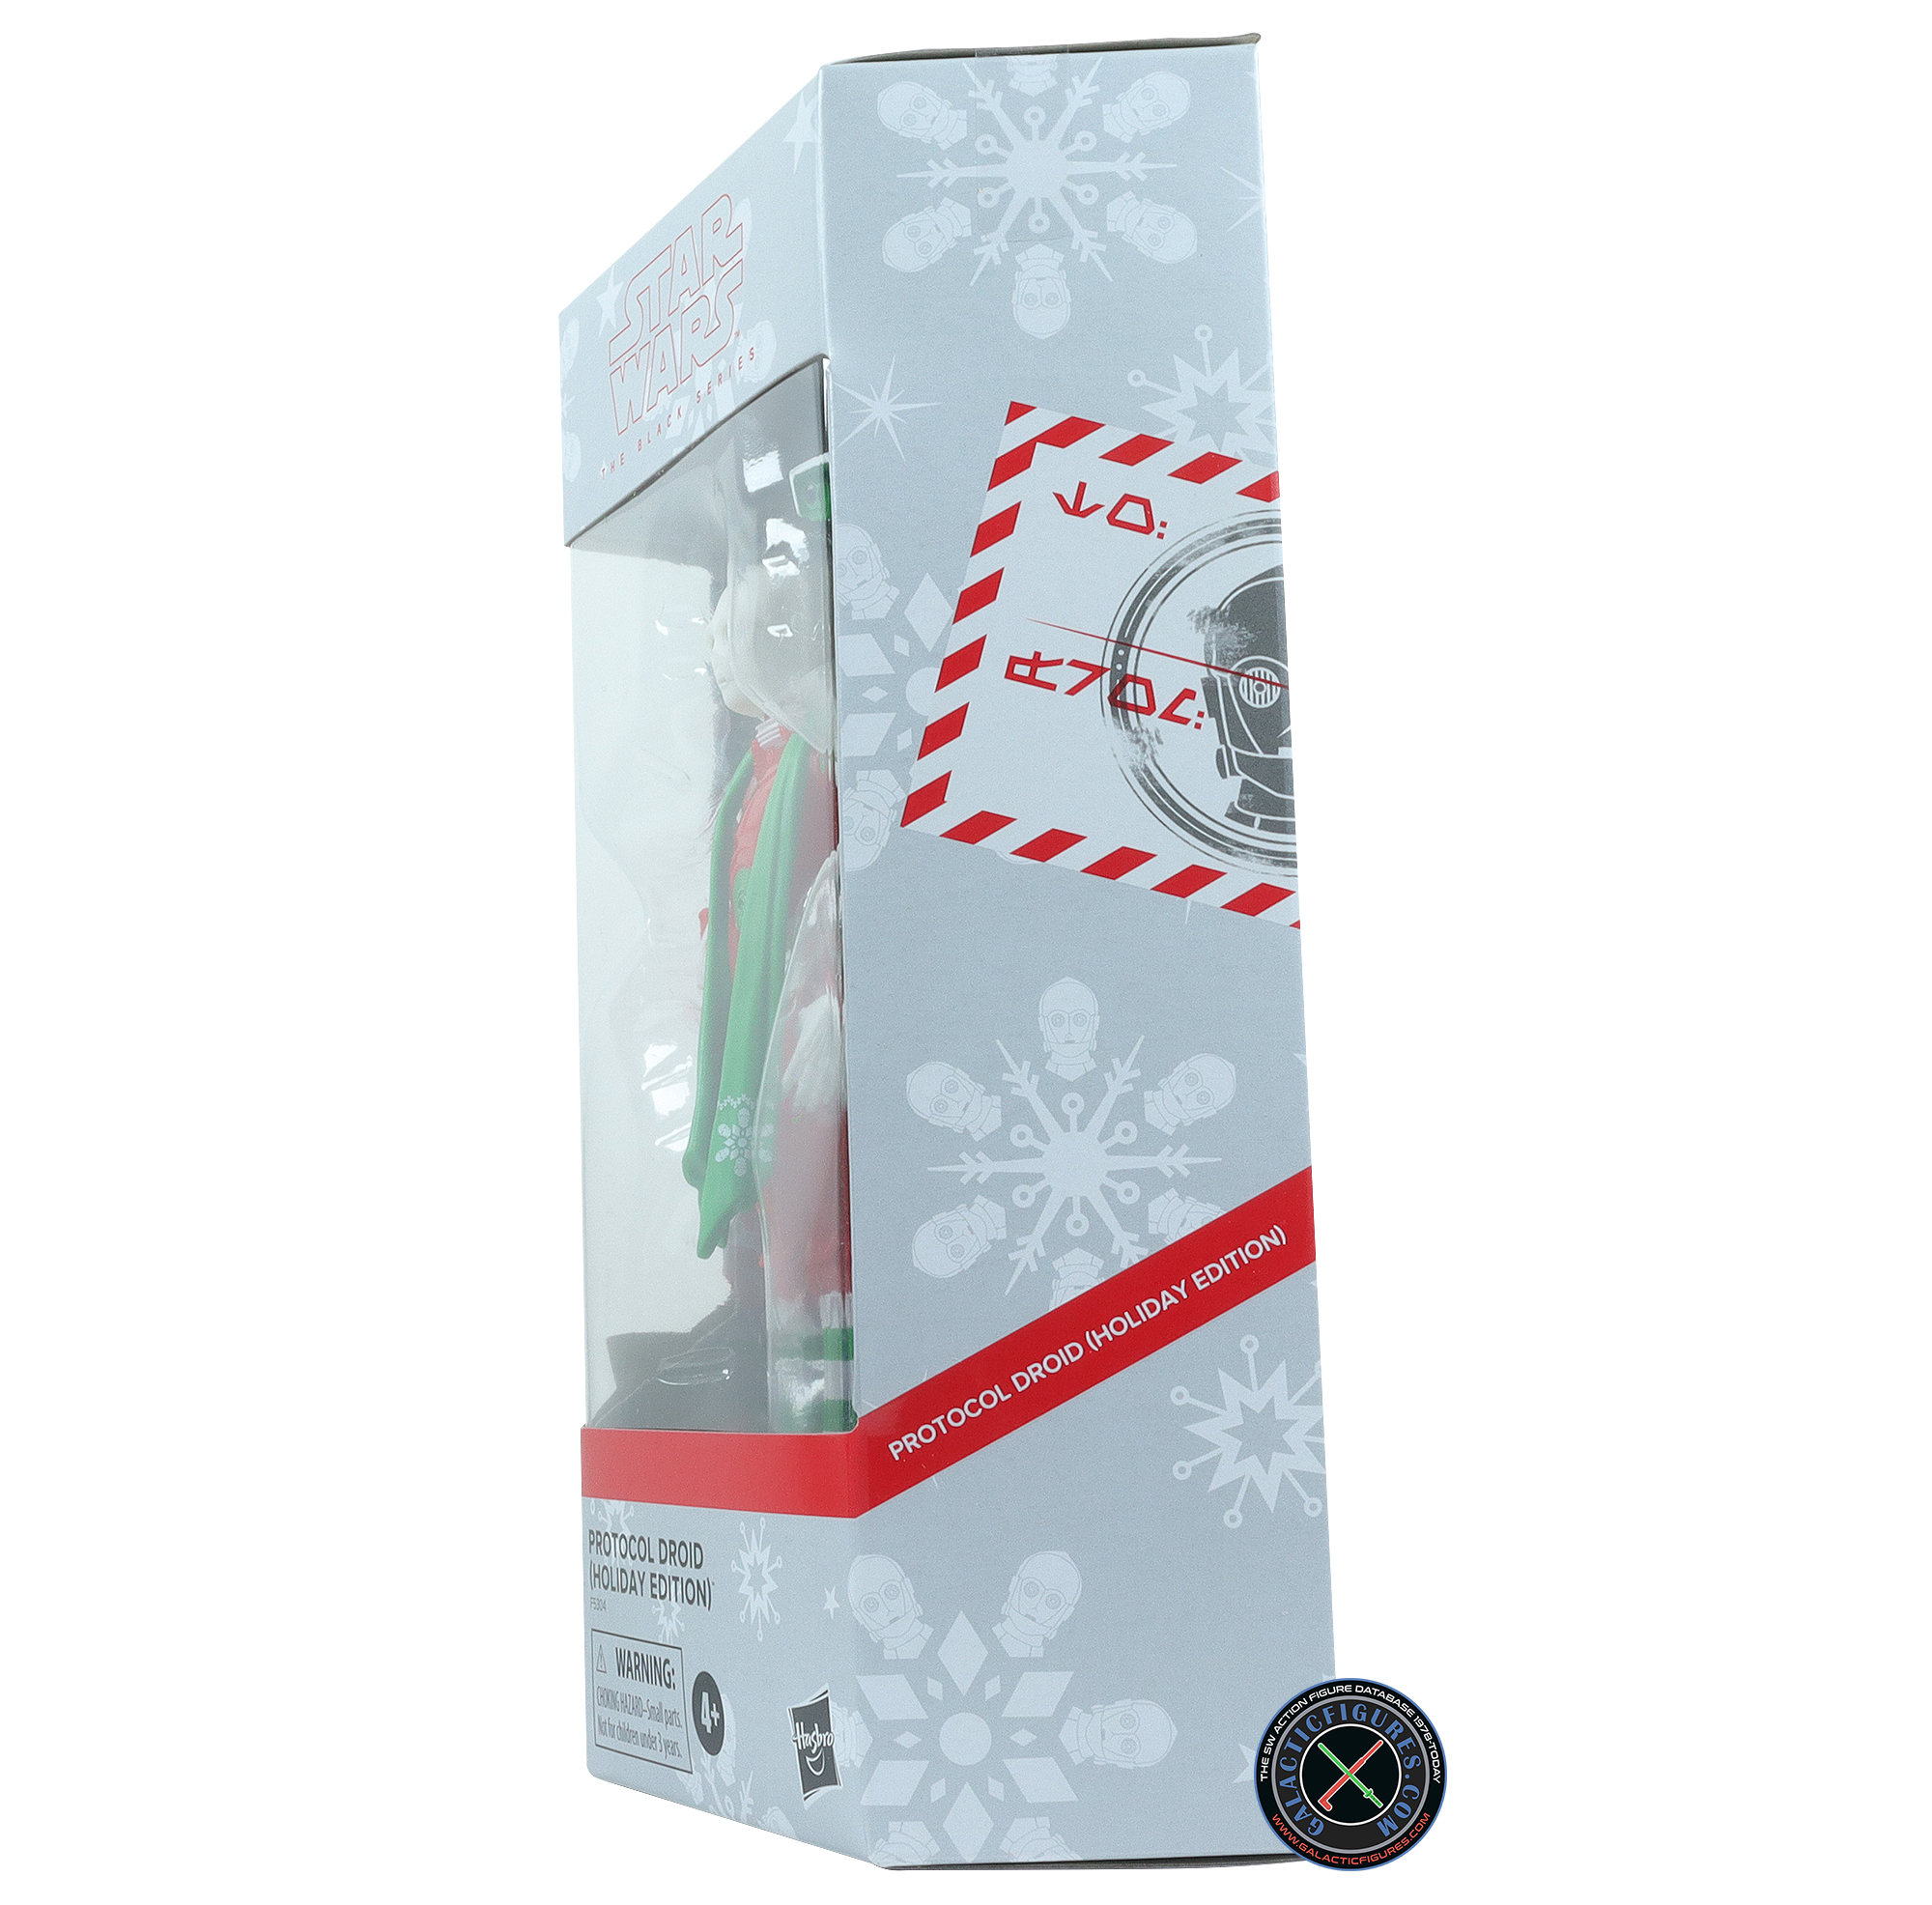 Protocol Droid 2022 Holiday Edition 2-Pack #2 of 6